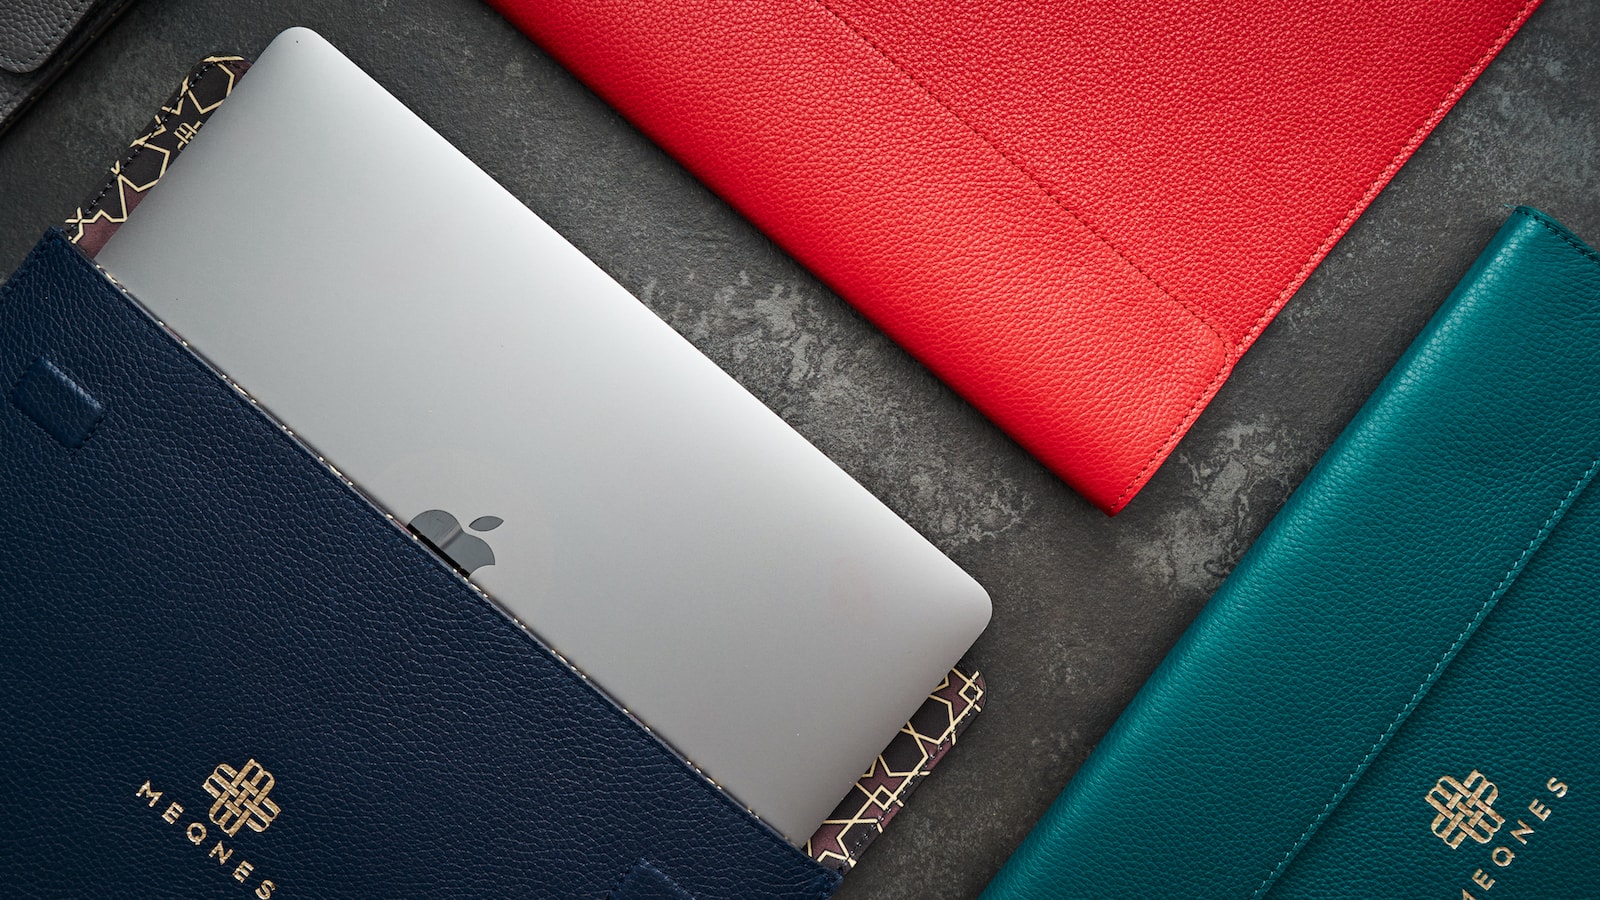 Meqnes Leather Laptop Sleeves are handcrafted and lined with Moroccan-inspired patterns